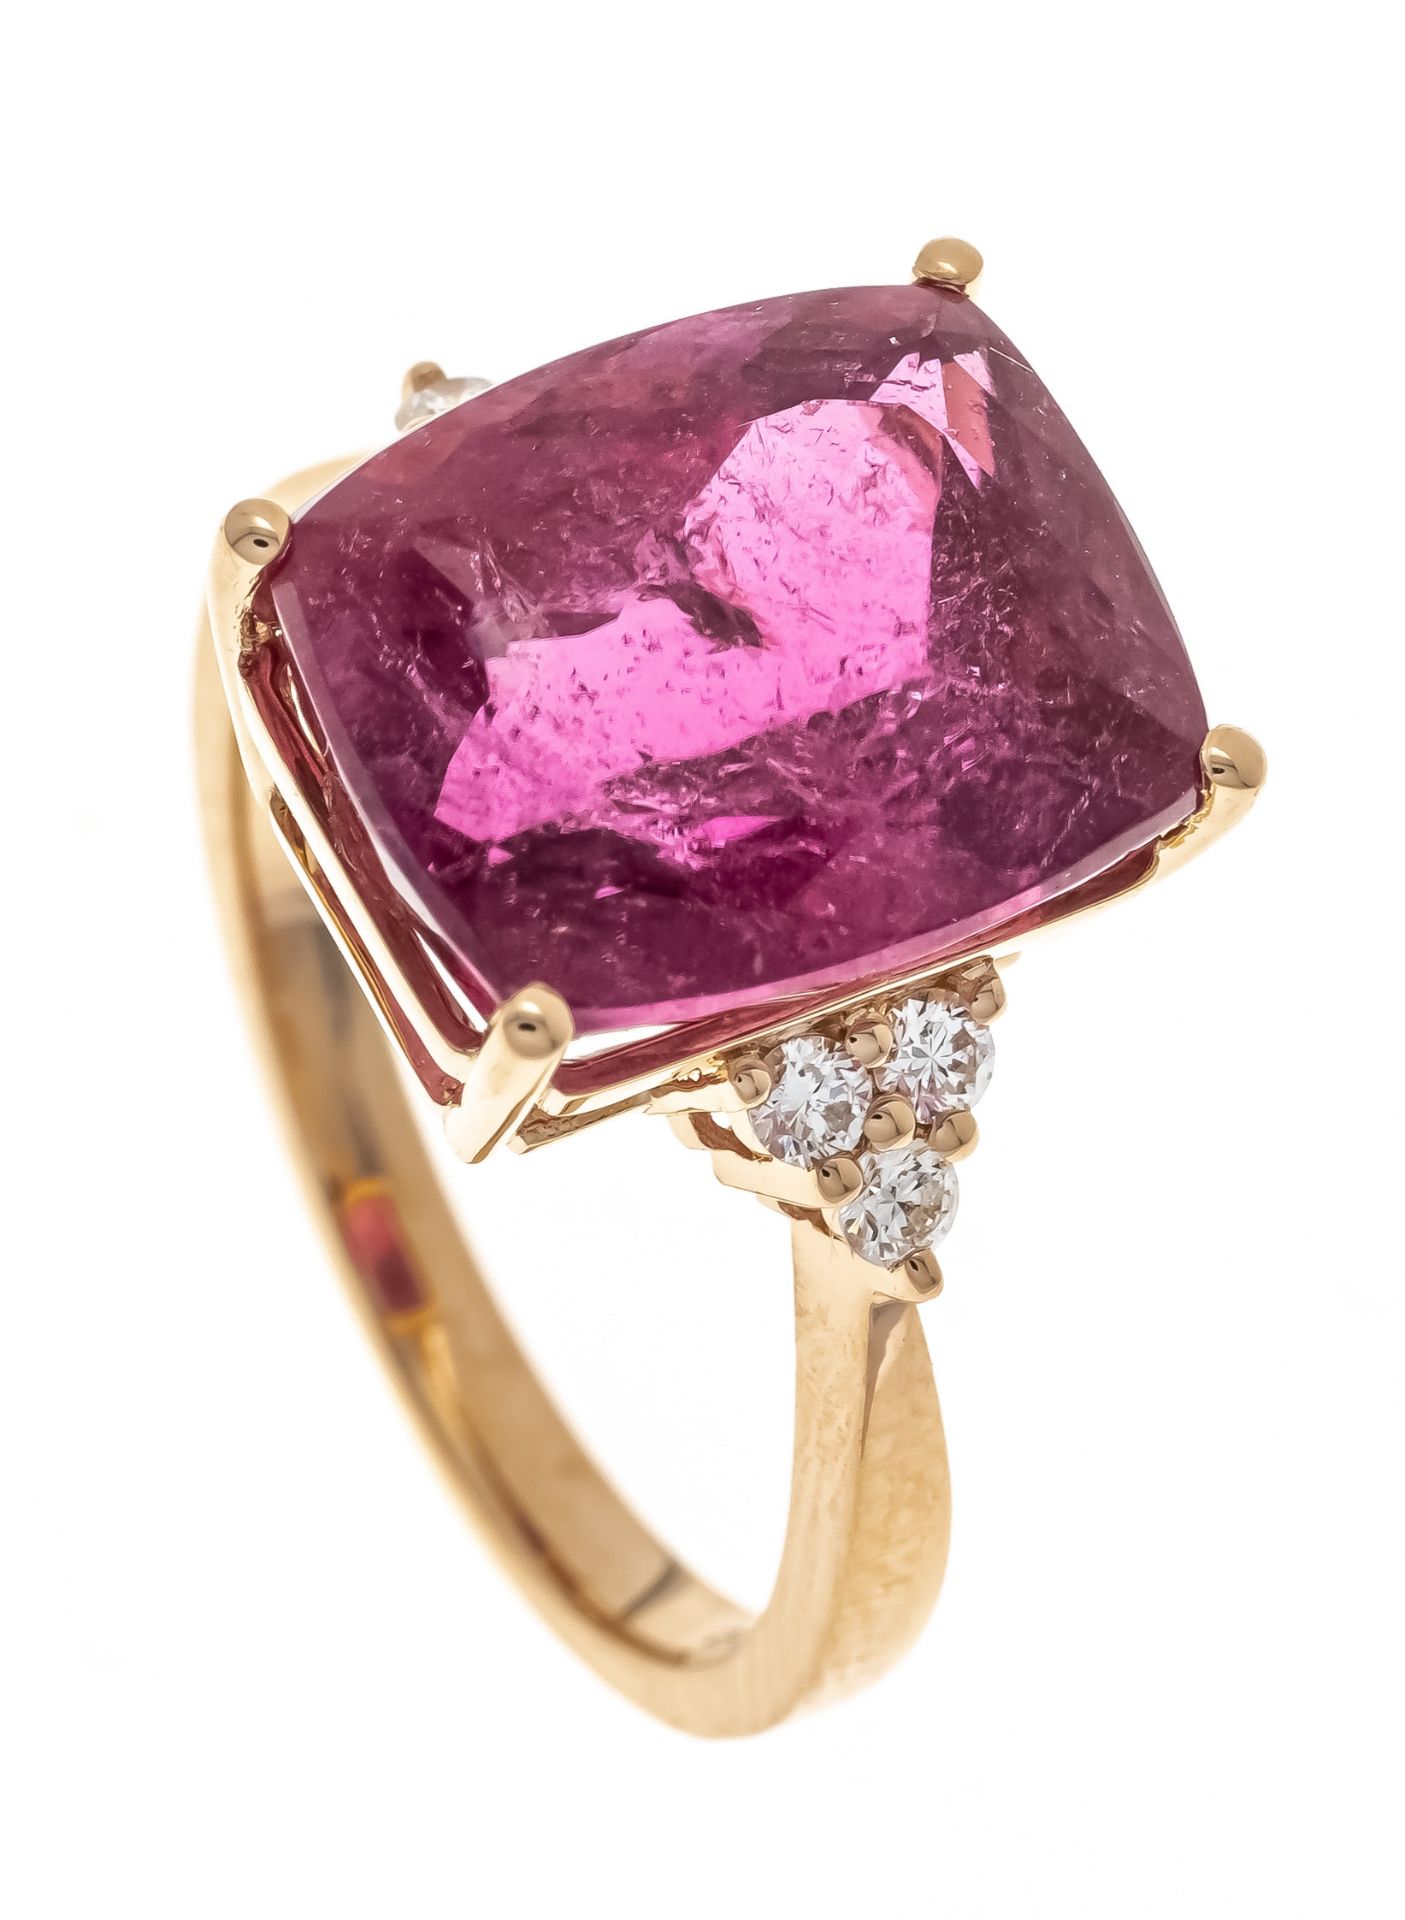 Rubellite diamond ring RG 750/000 with an antique-cut faceted rubellite 7.8 ct, strong darker